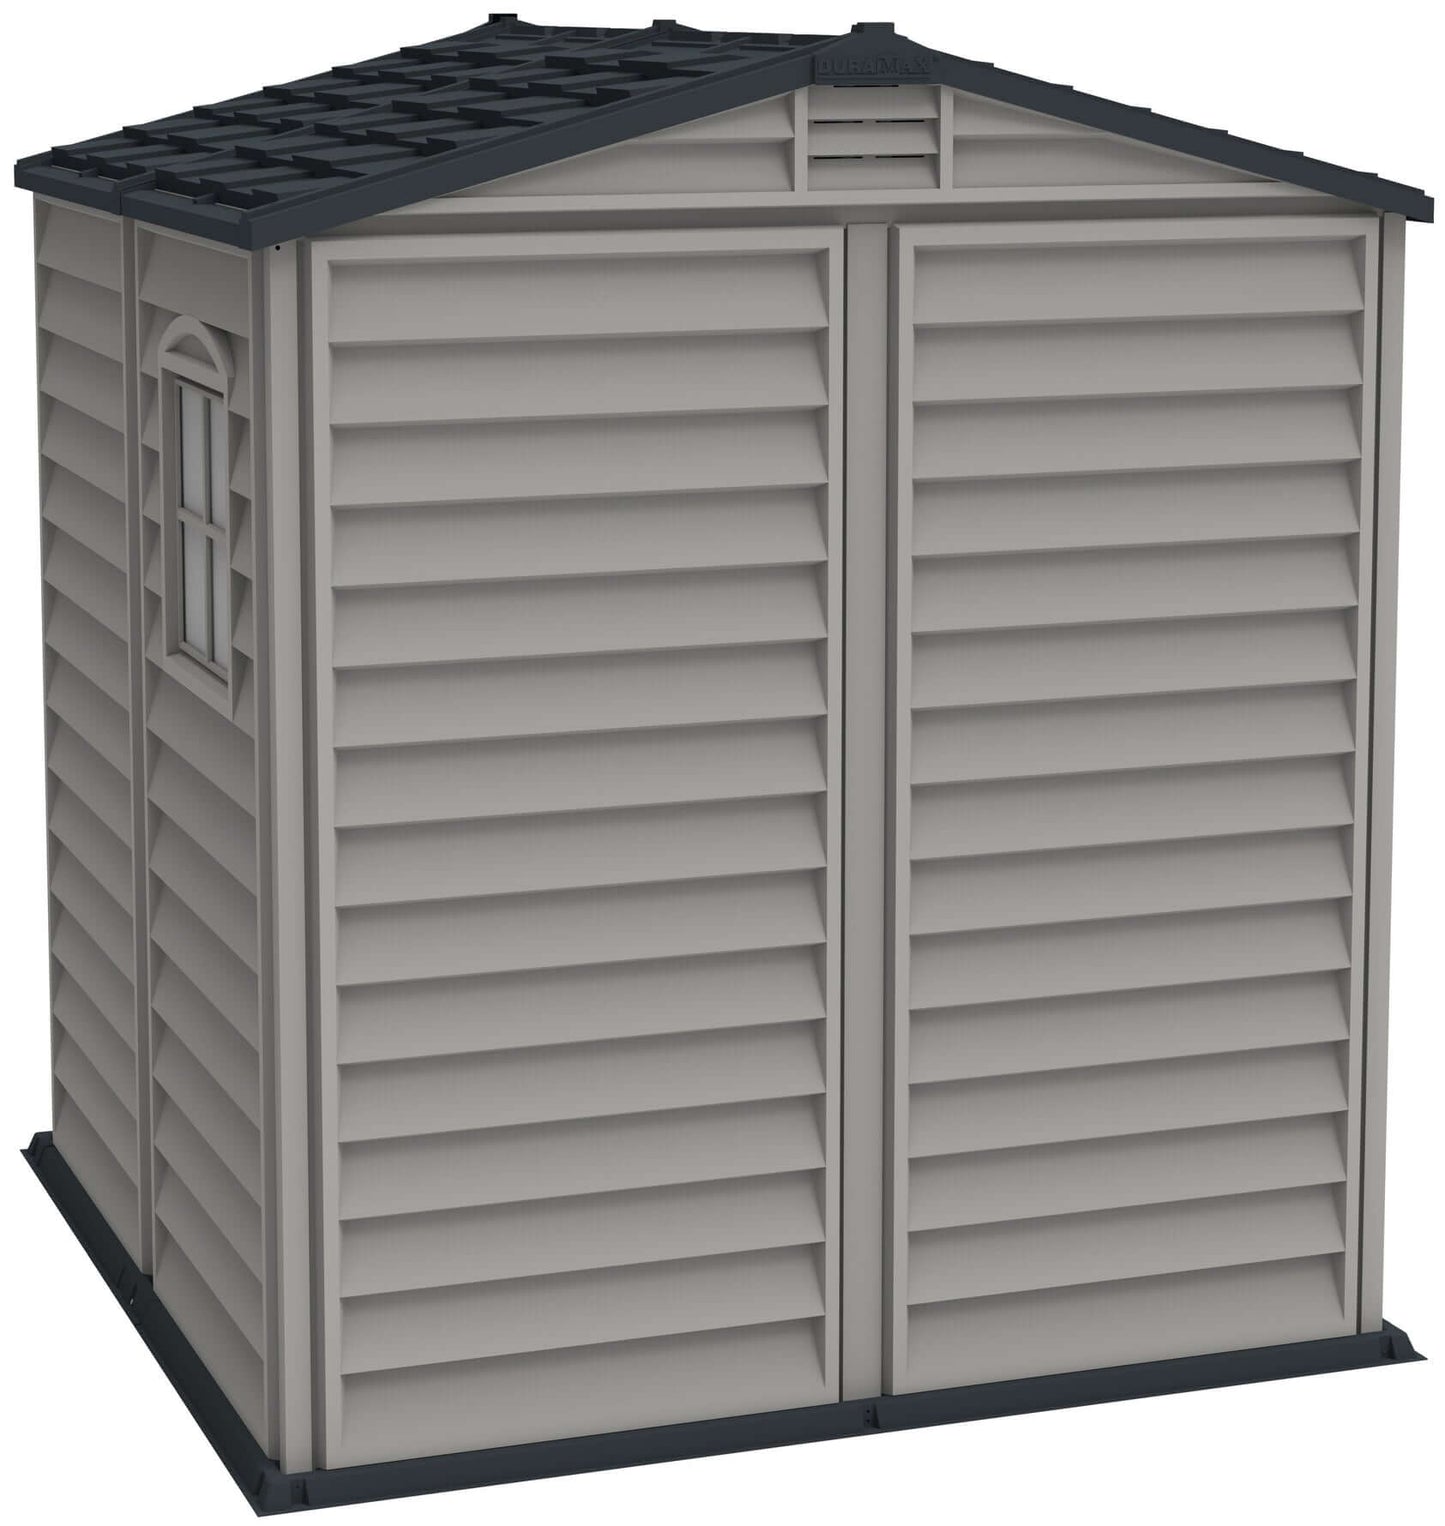 Duramax 6' x 6' StoreMate Plus Vinyl Shed w/ Floor 30425 back view of the shed